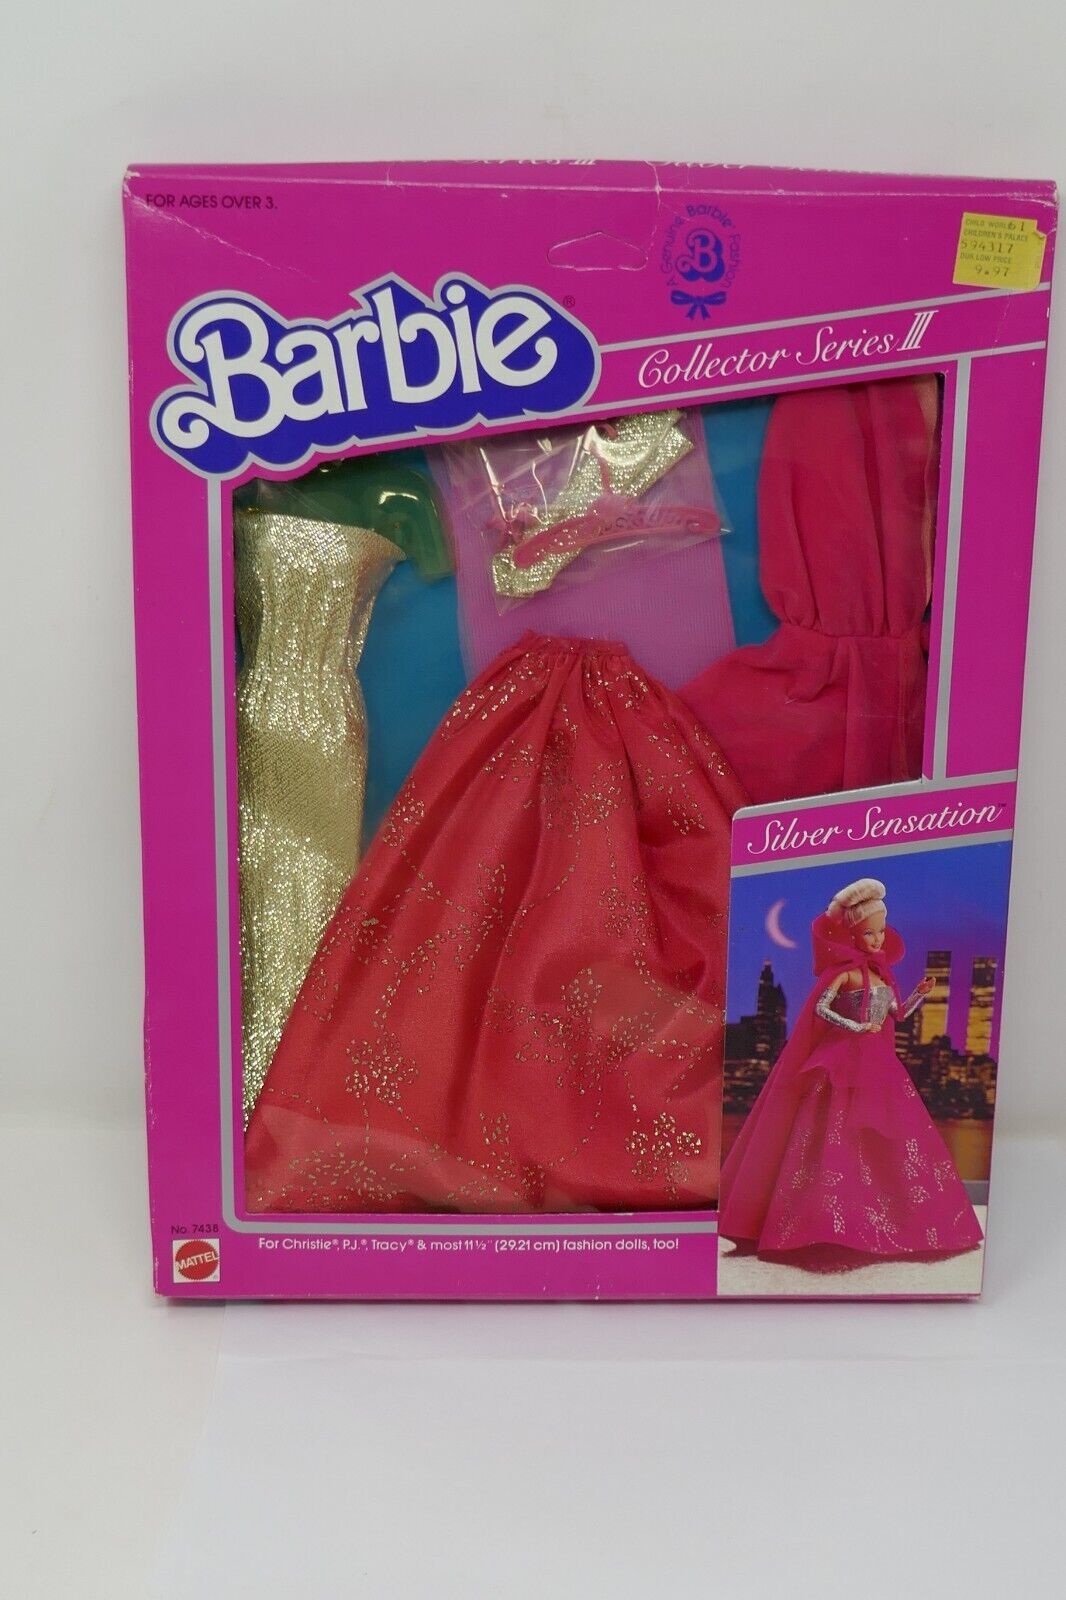 Mattel 1983 Collector Series III Silver Sensation Barbie Doll Outfit 7438 NRFB - £39.30 GBP